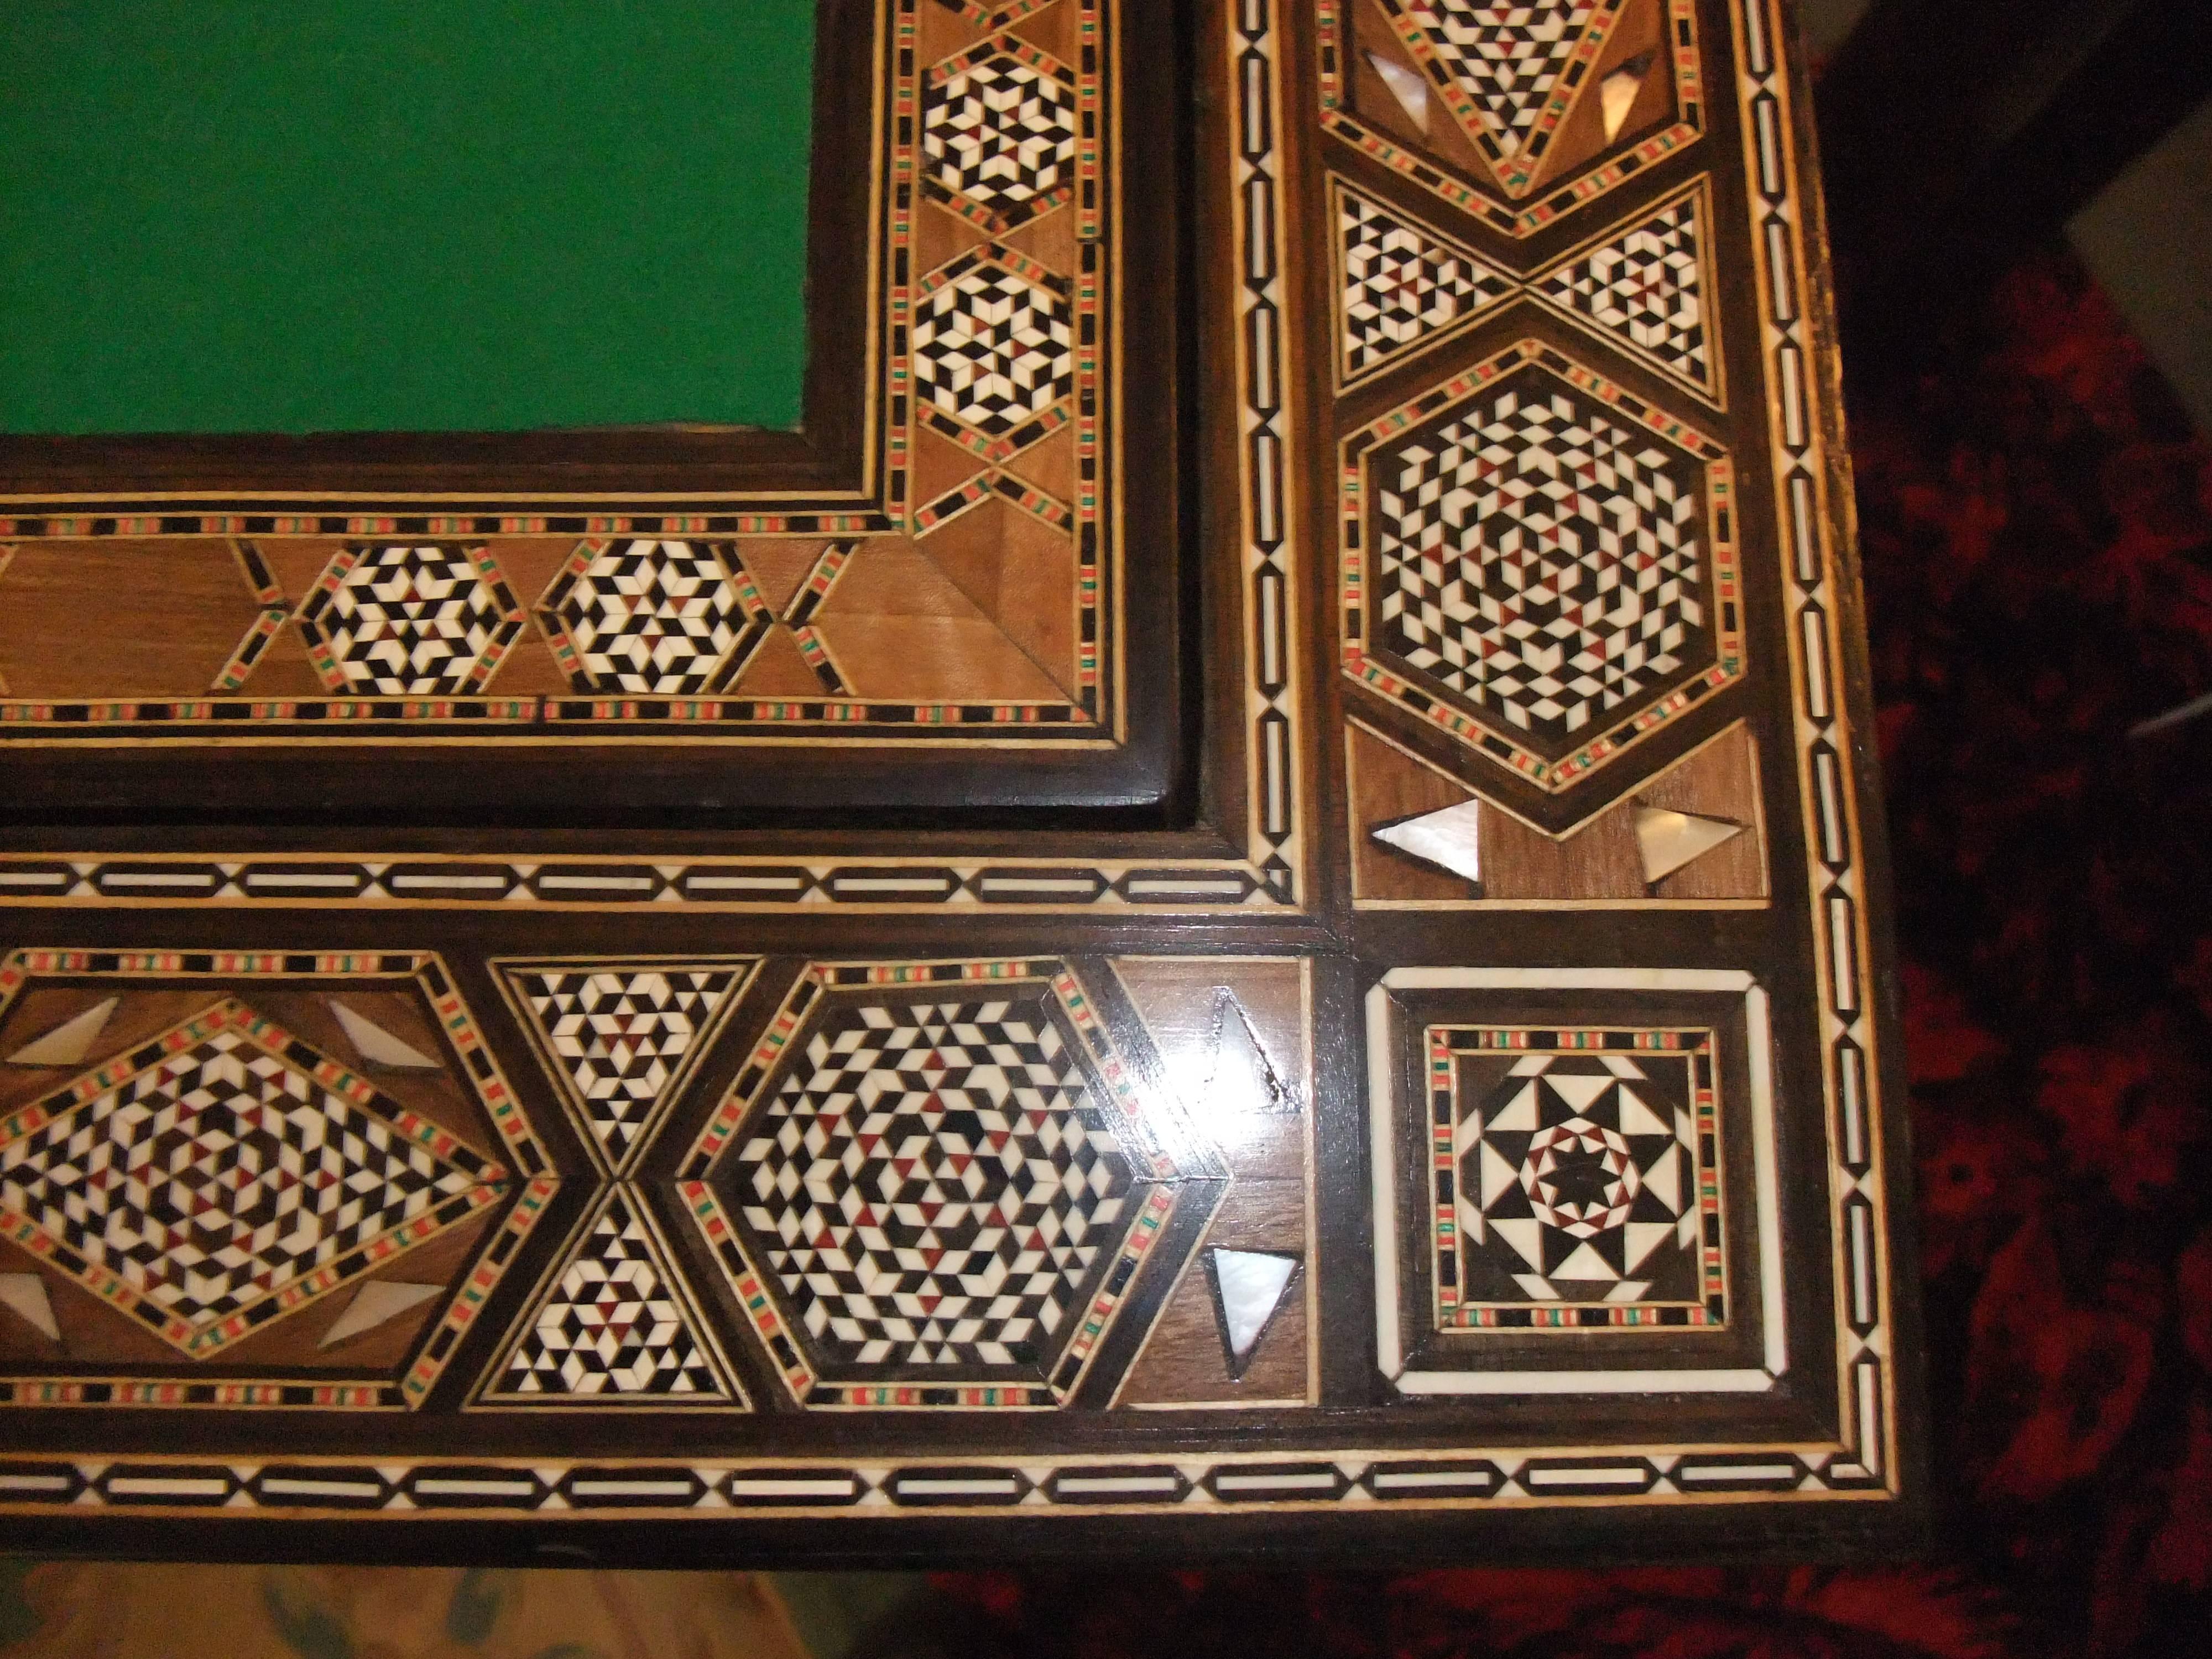 Damascus games table brought back from Syria in 1946. The whole is covered in specimen woods, mother-of-pearl, ivories etc. Small areas of missing embellishment commensurate with age. Measures: 29' x 15' doubling in size to 29' x 29'. £850.
 